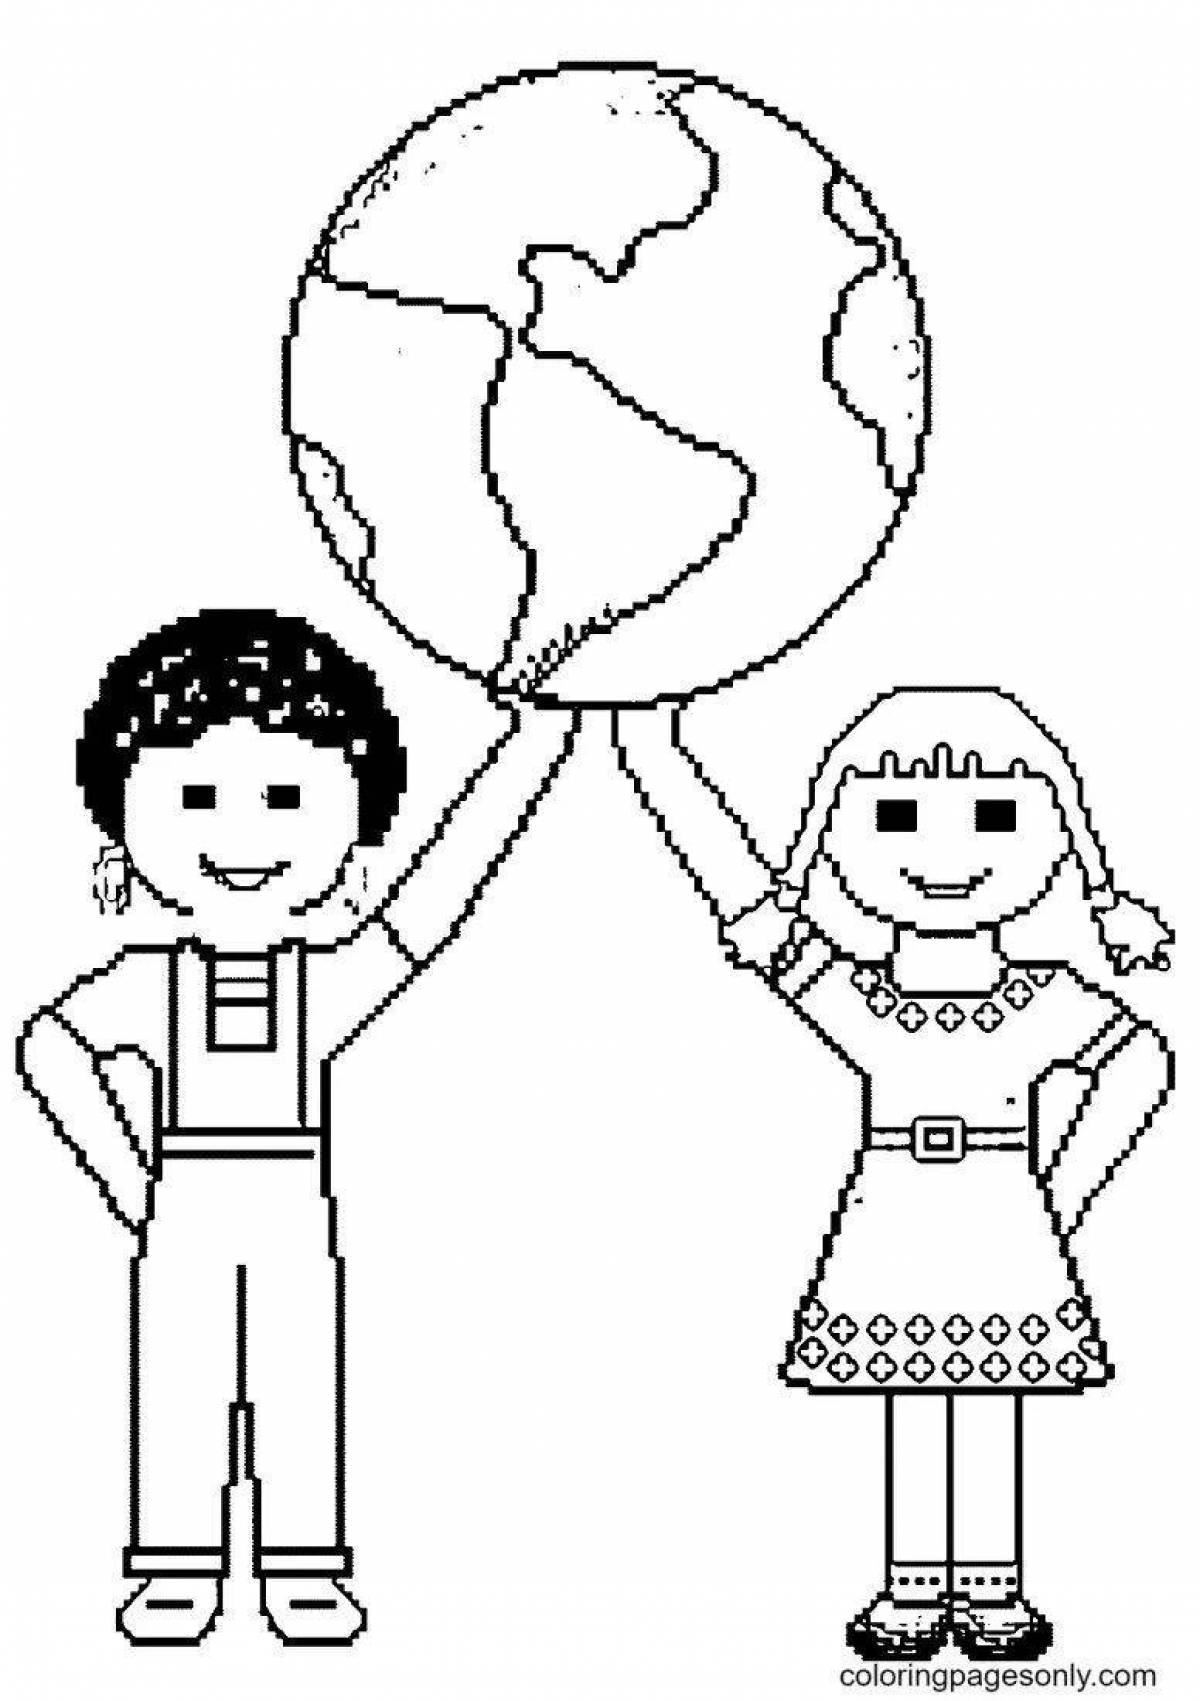 Exquisite may there always be peace coloring page